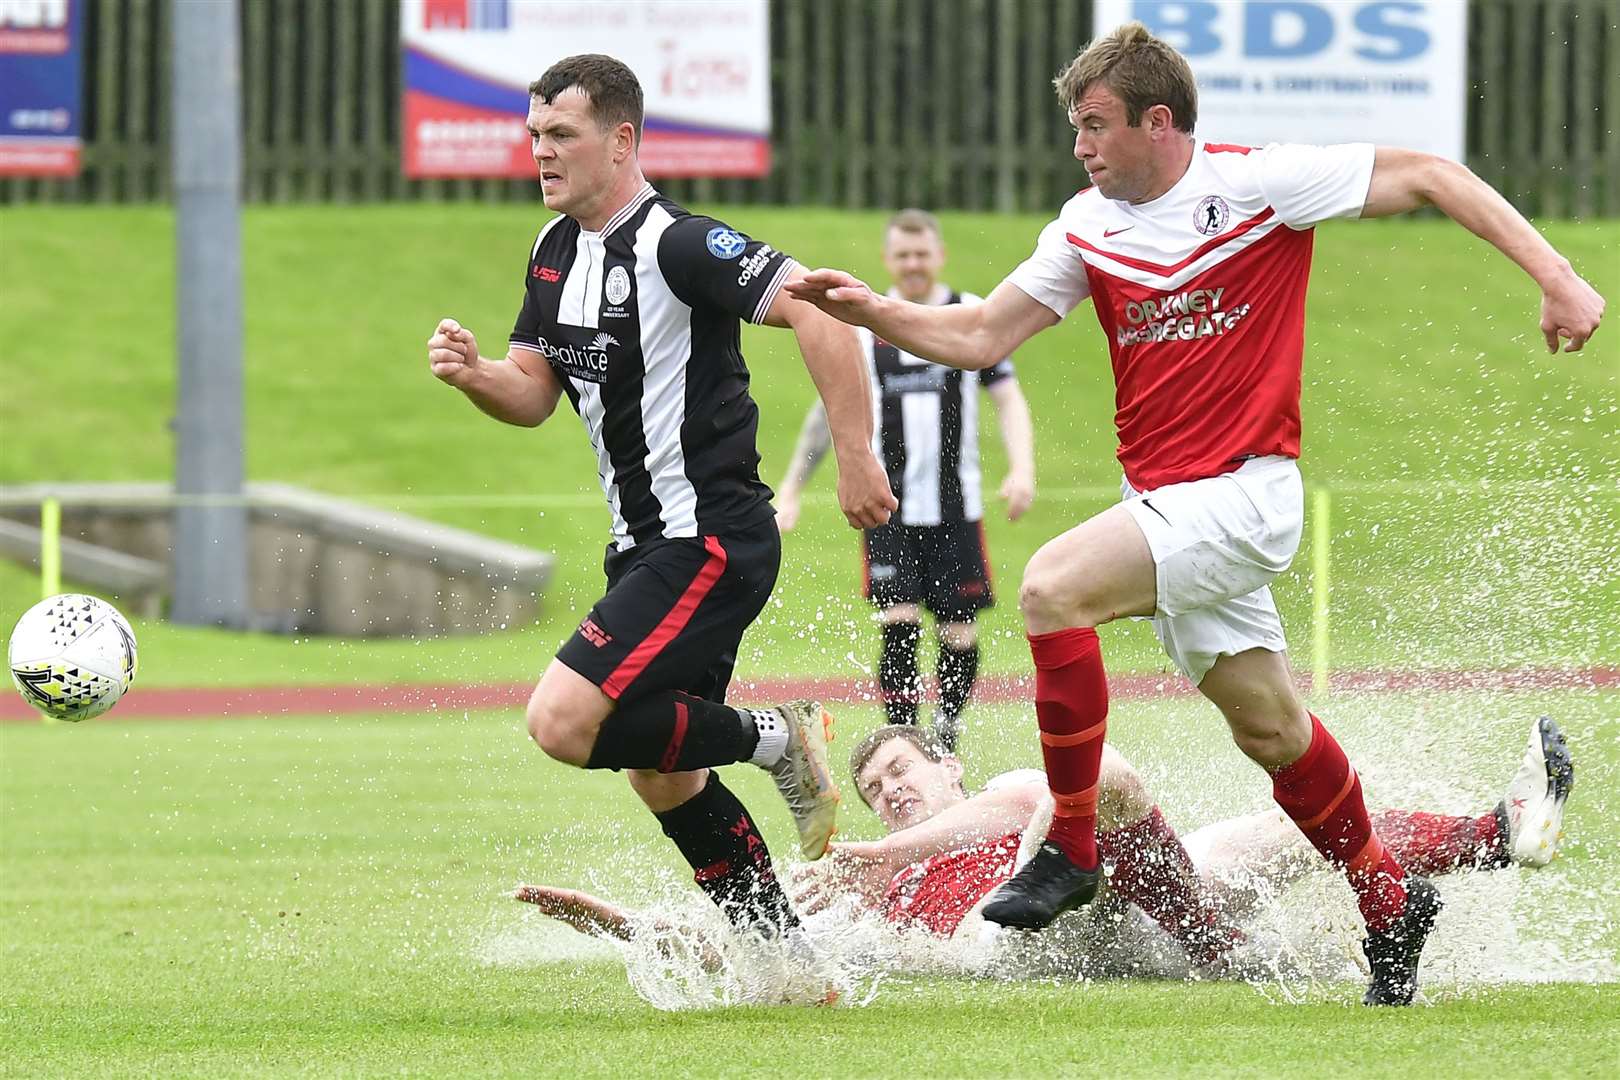 Orkney's Owen Rendall goes for a swim as Jon Tait and Wick's Gordon MacNab chase the ball. Picture: Mel Roger